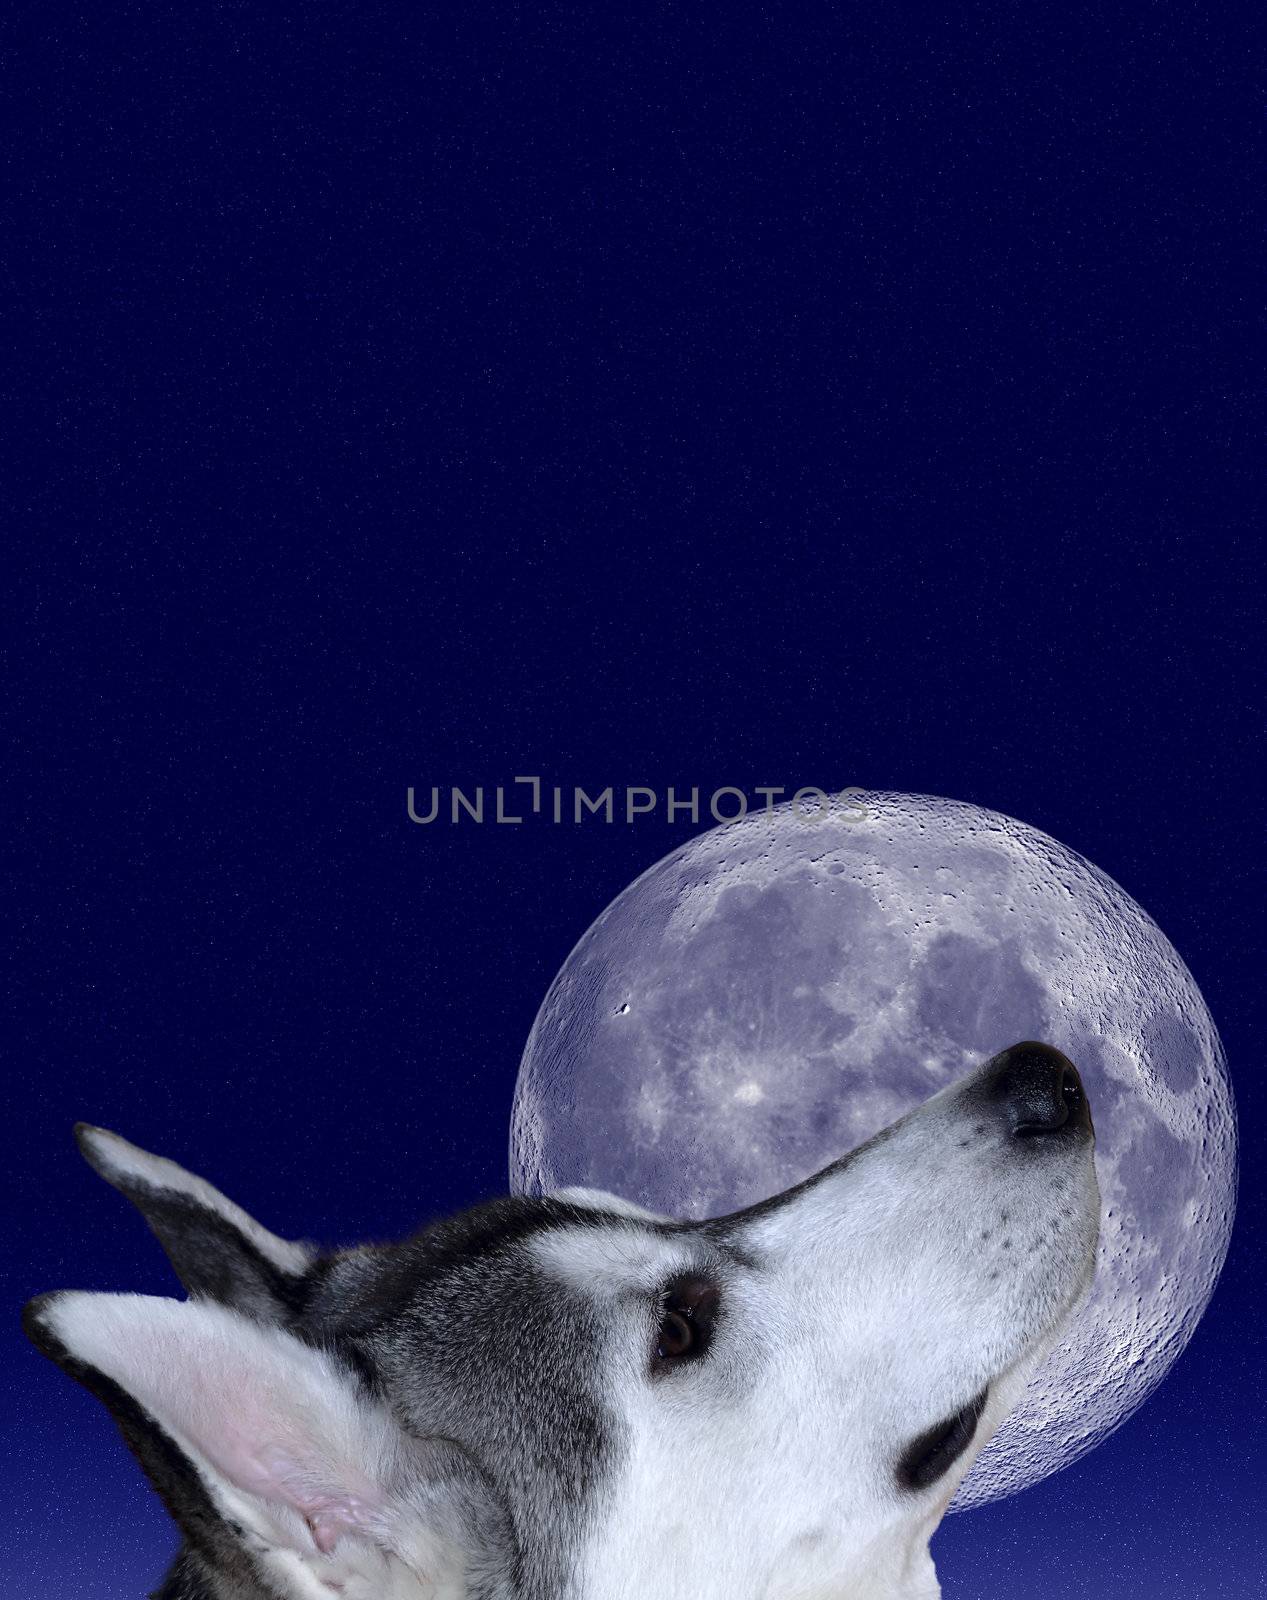 Image depicting man's best friend, the dog, howling at the moon